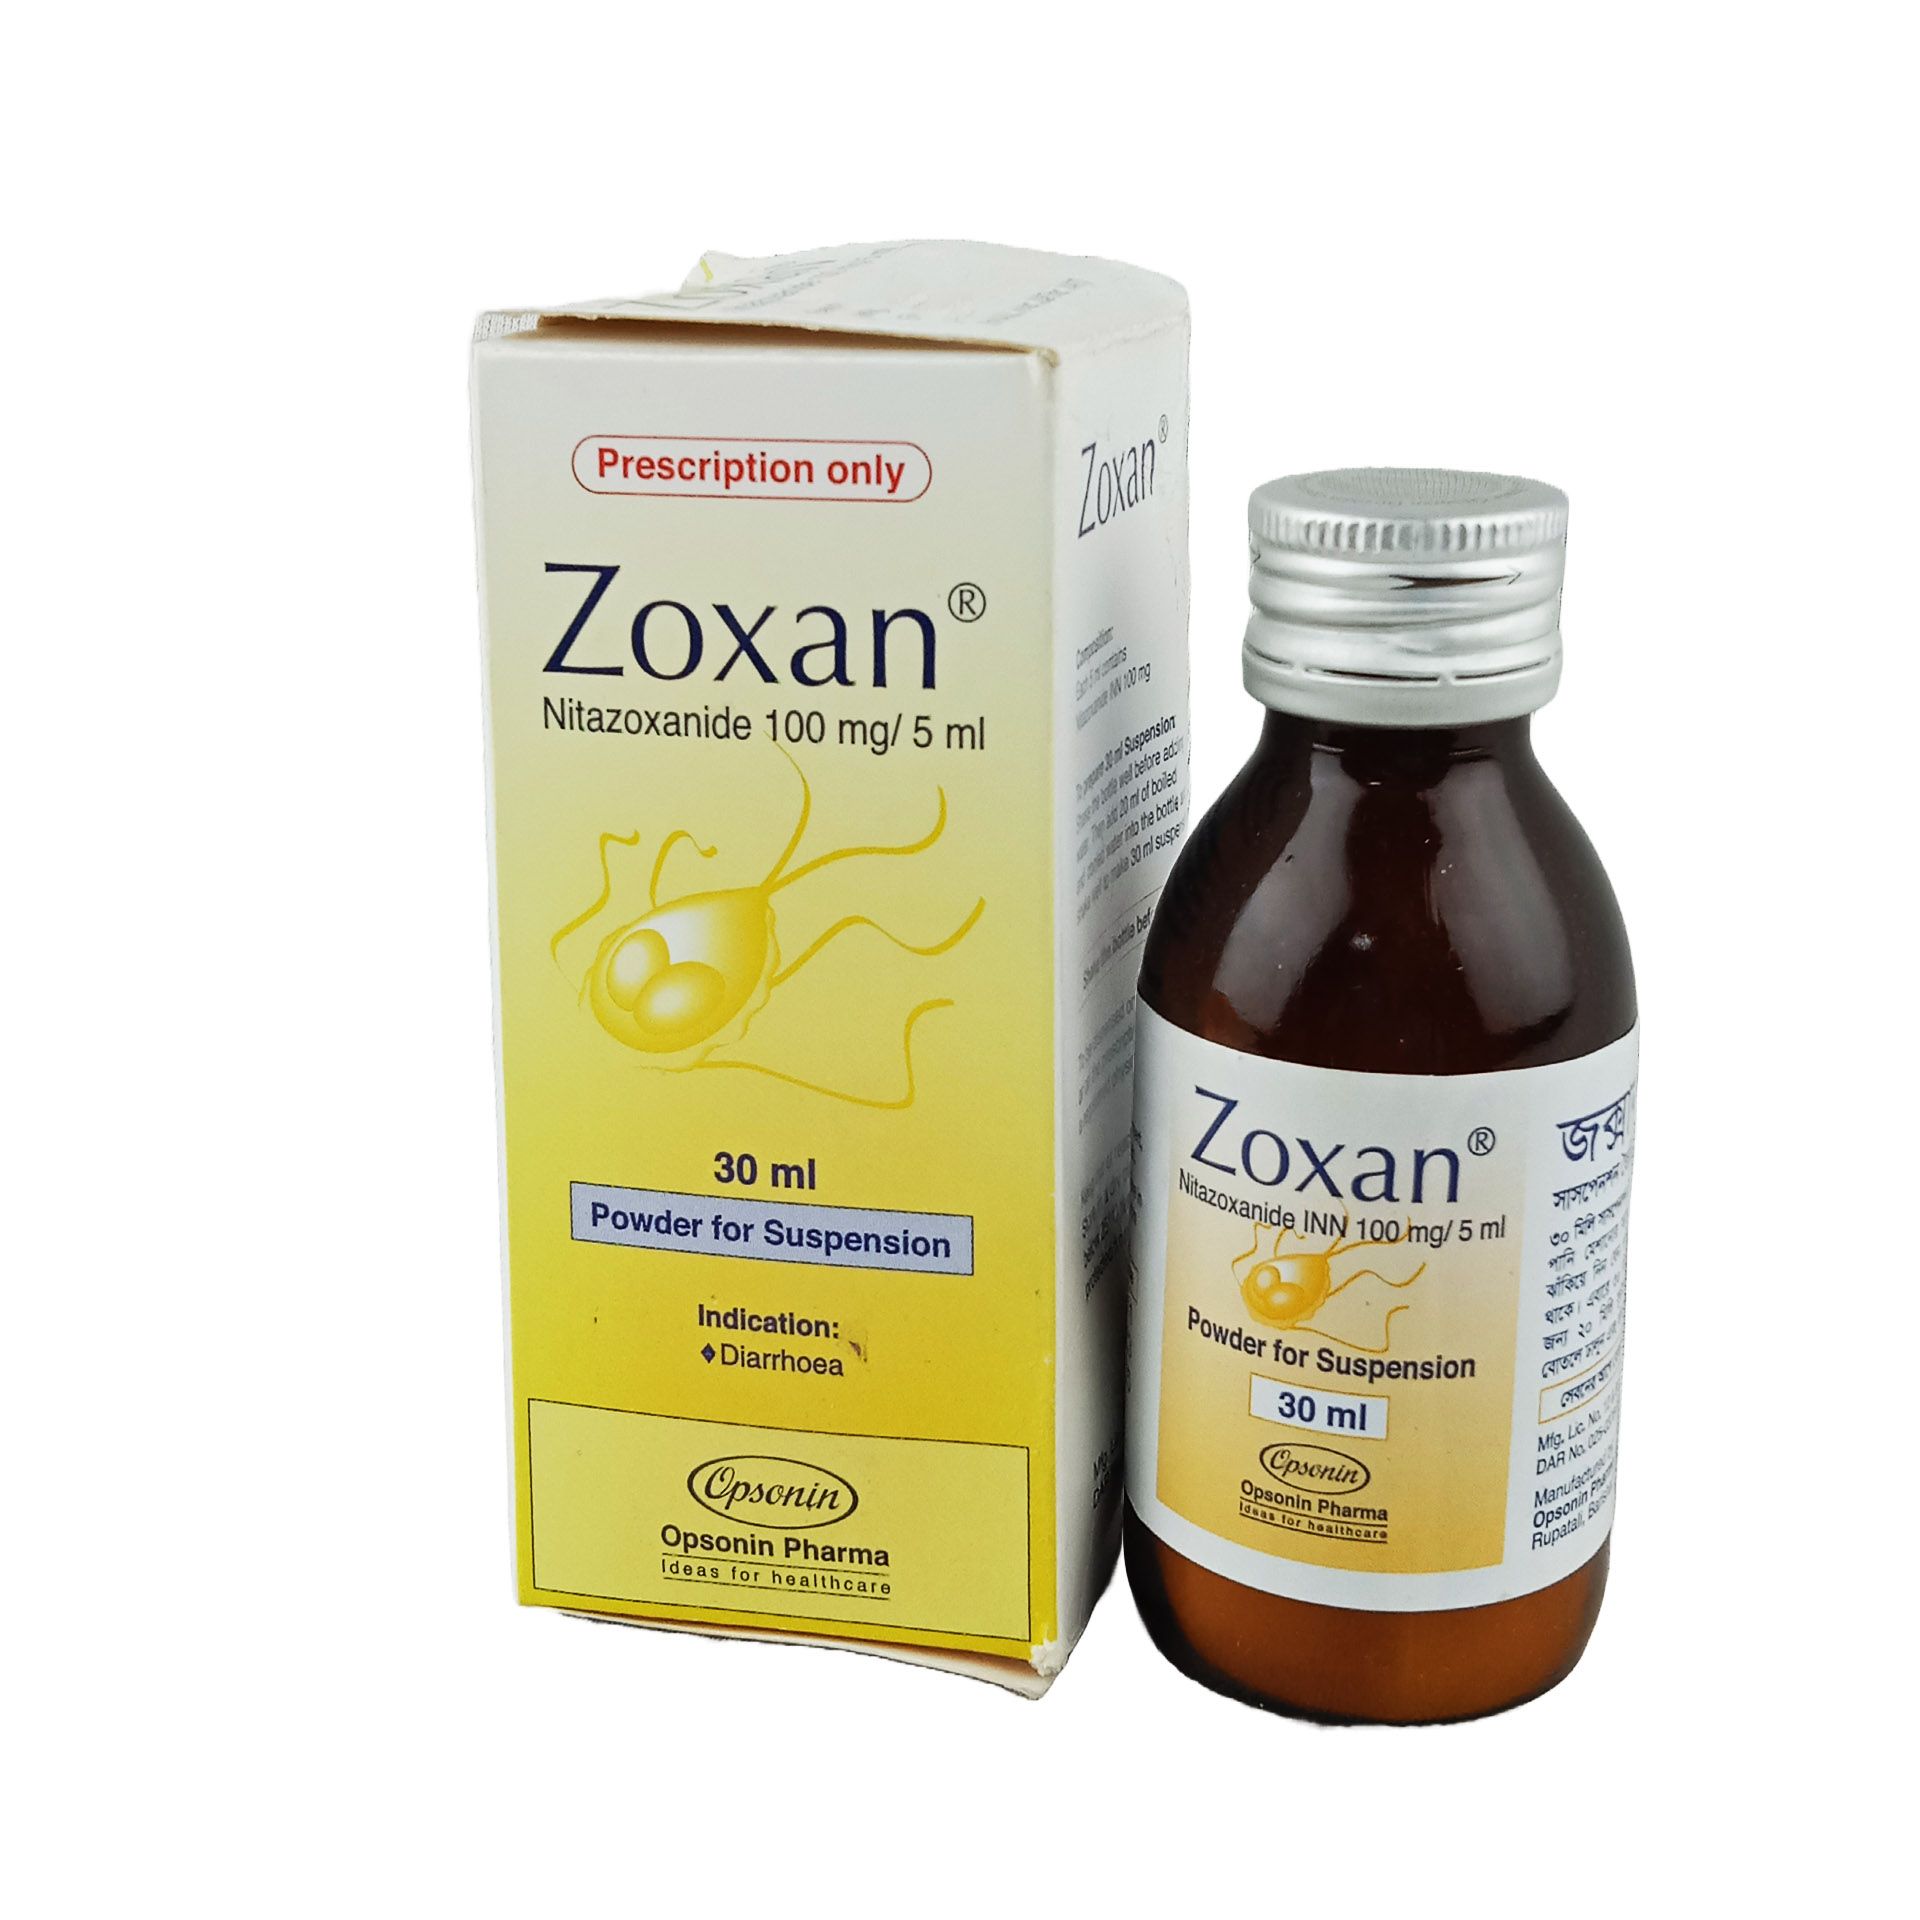 Zoxan 100mg/5ml Powder for Suspension